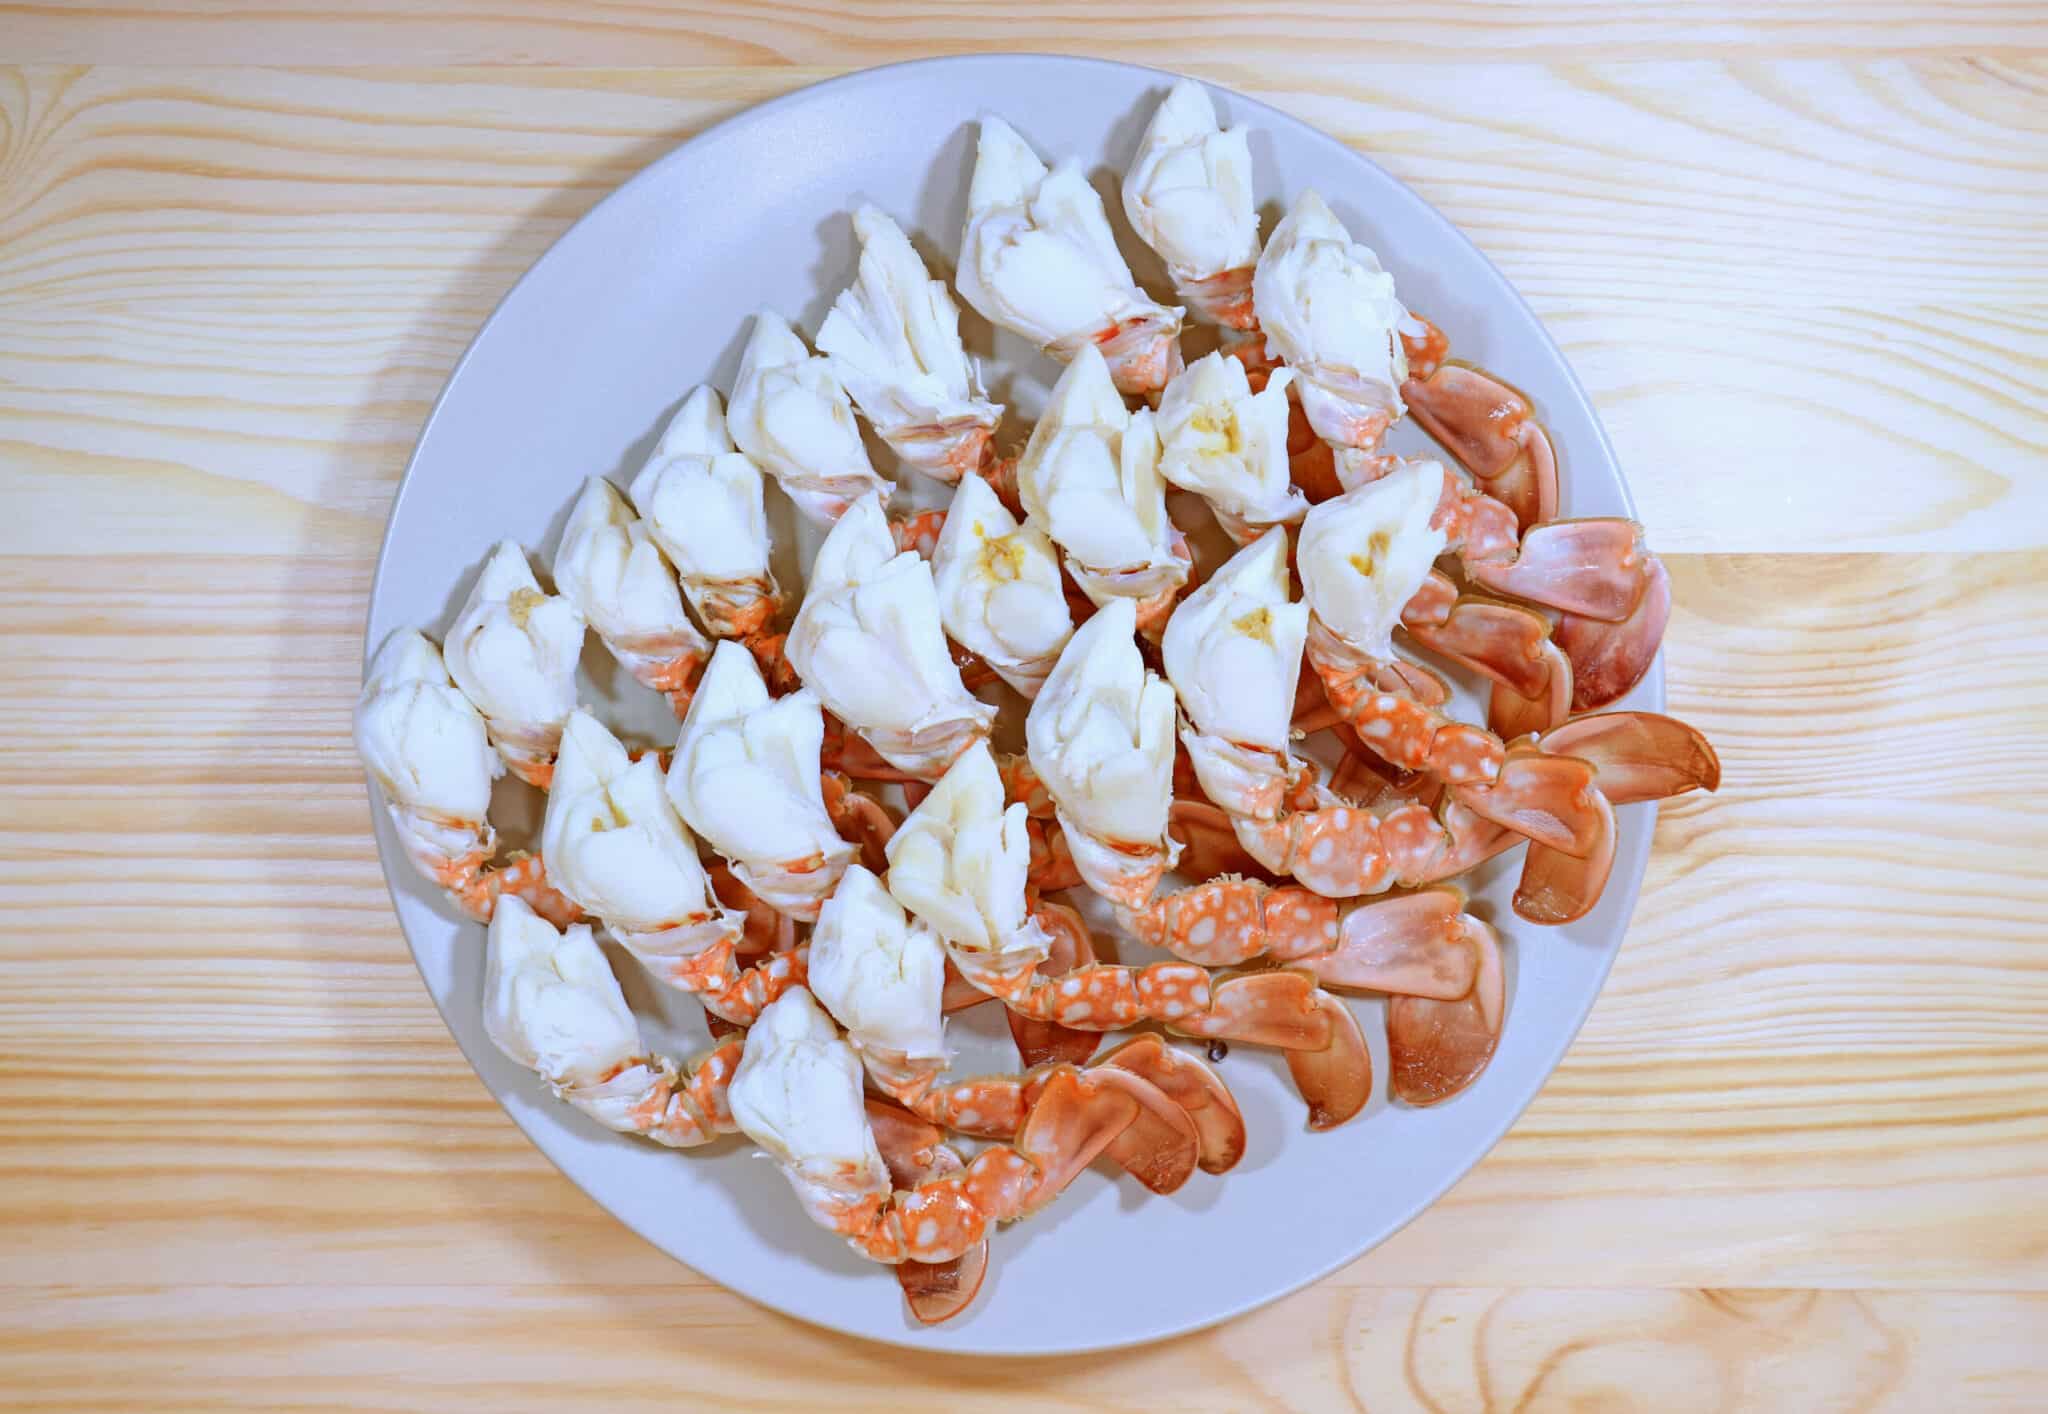 How To Cook Steamed Crab Legs In The Oven